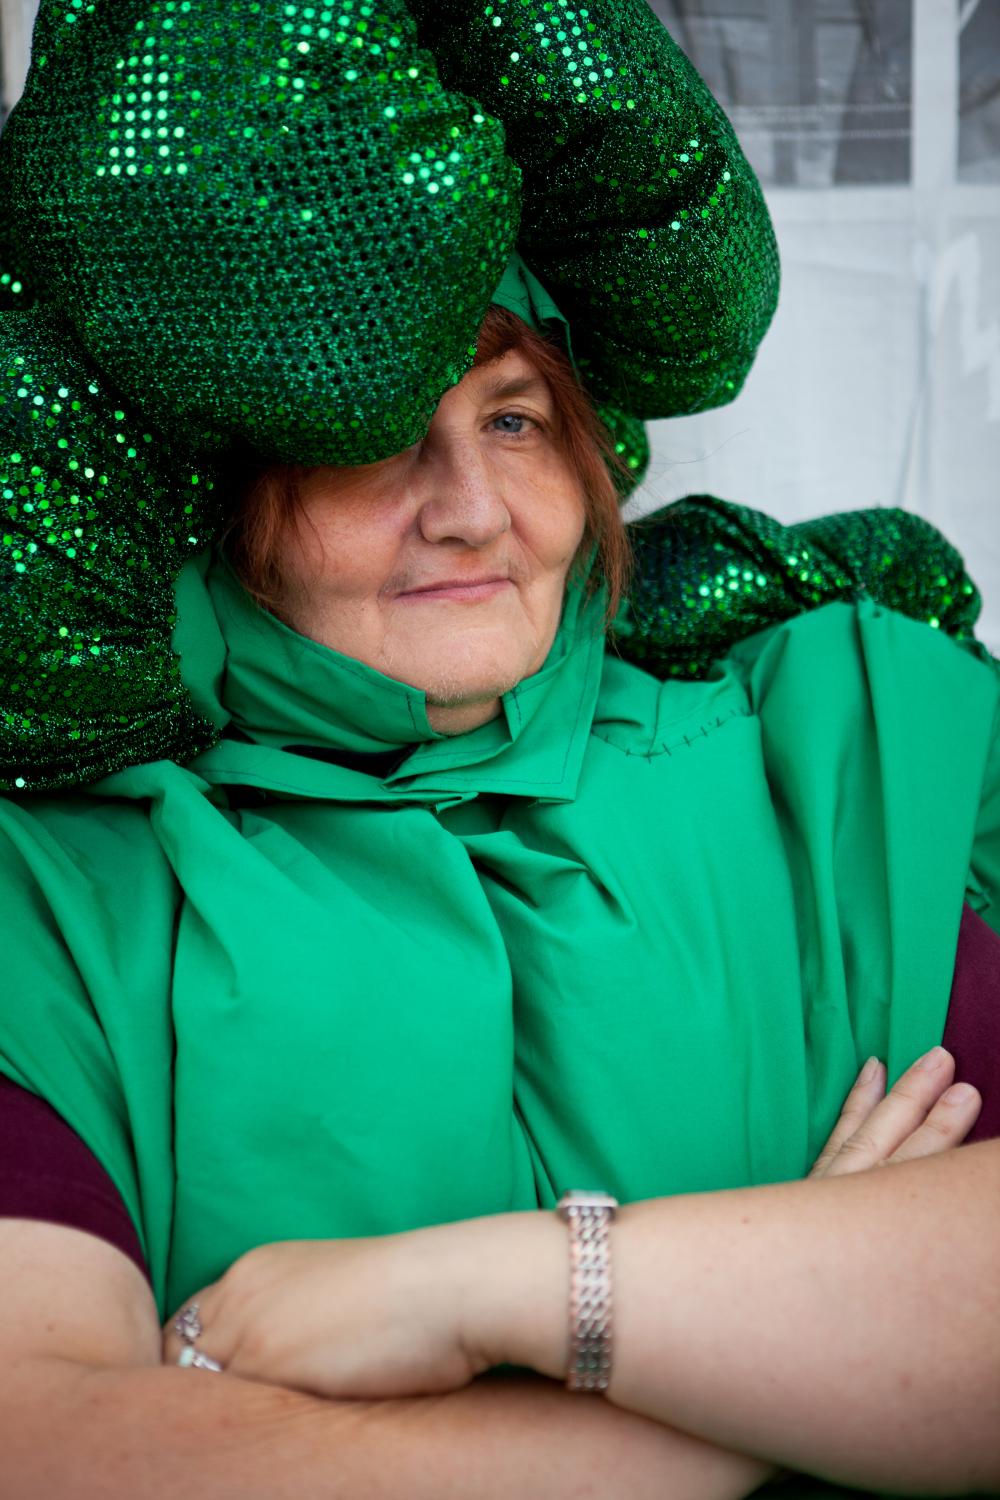 A woman in a green costume with a dark green, sequined bulbous hat resembling broccoli florets, smiling slightly with crossed arms